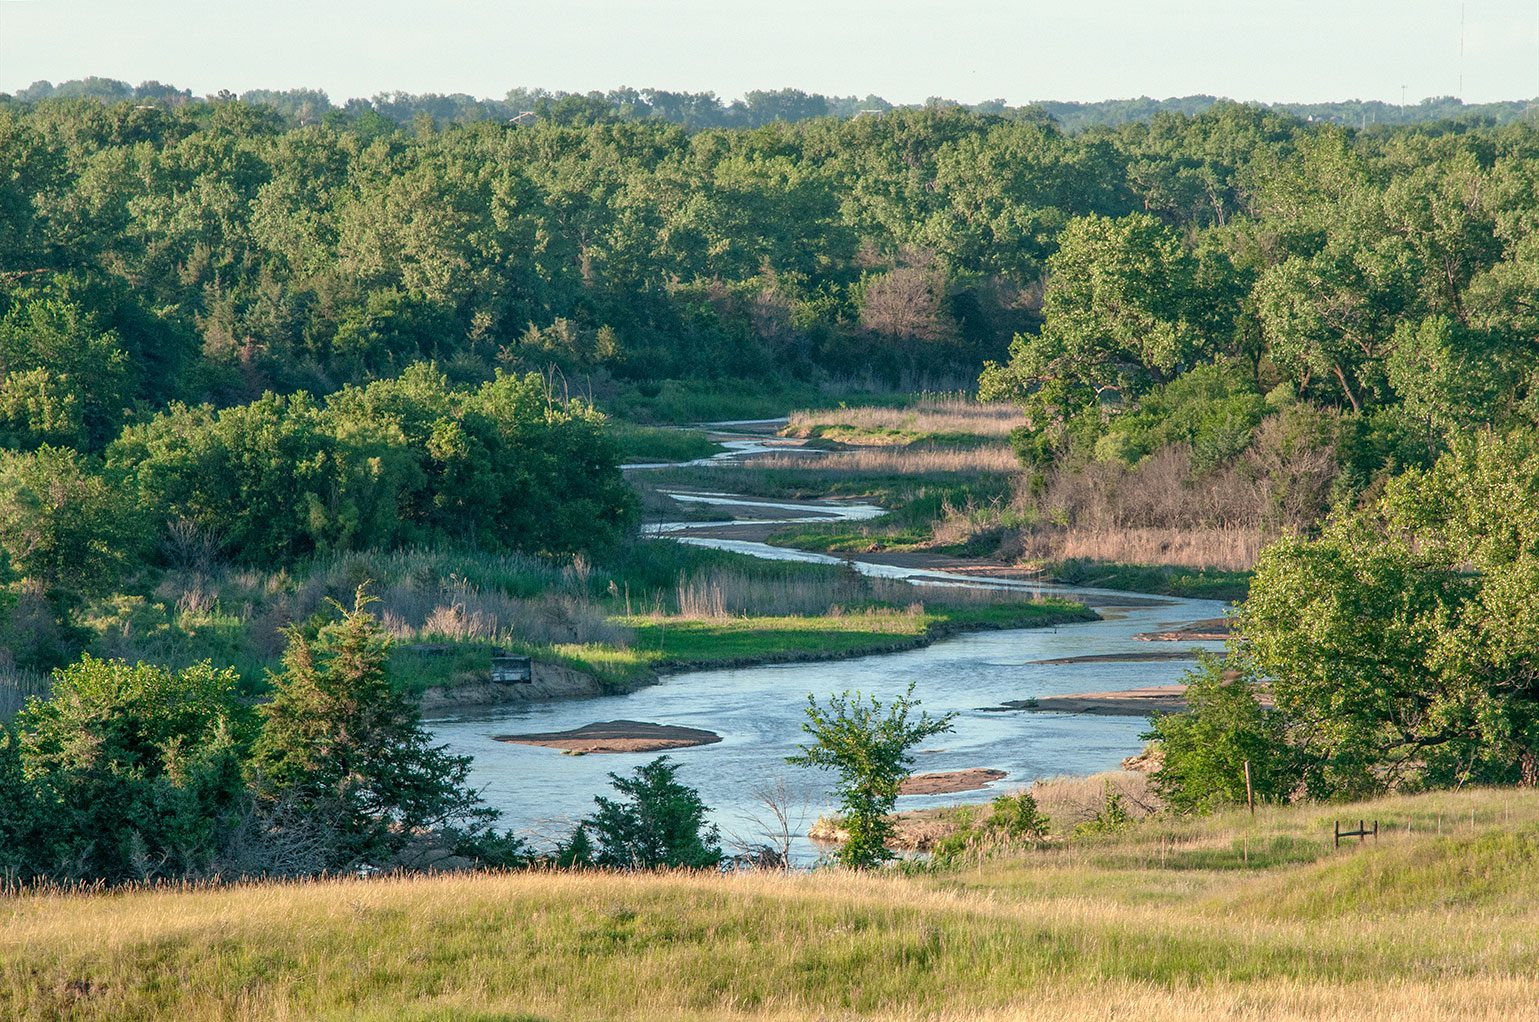 Platte River showing wooded habitat. Photo by Chris Helzer.